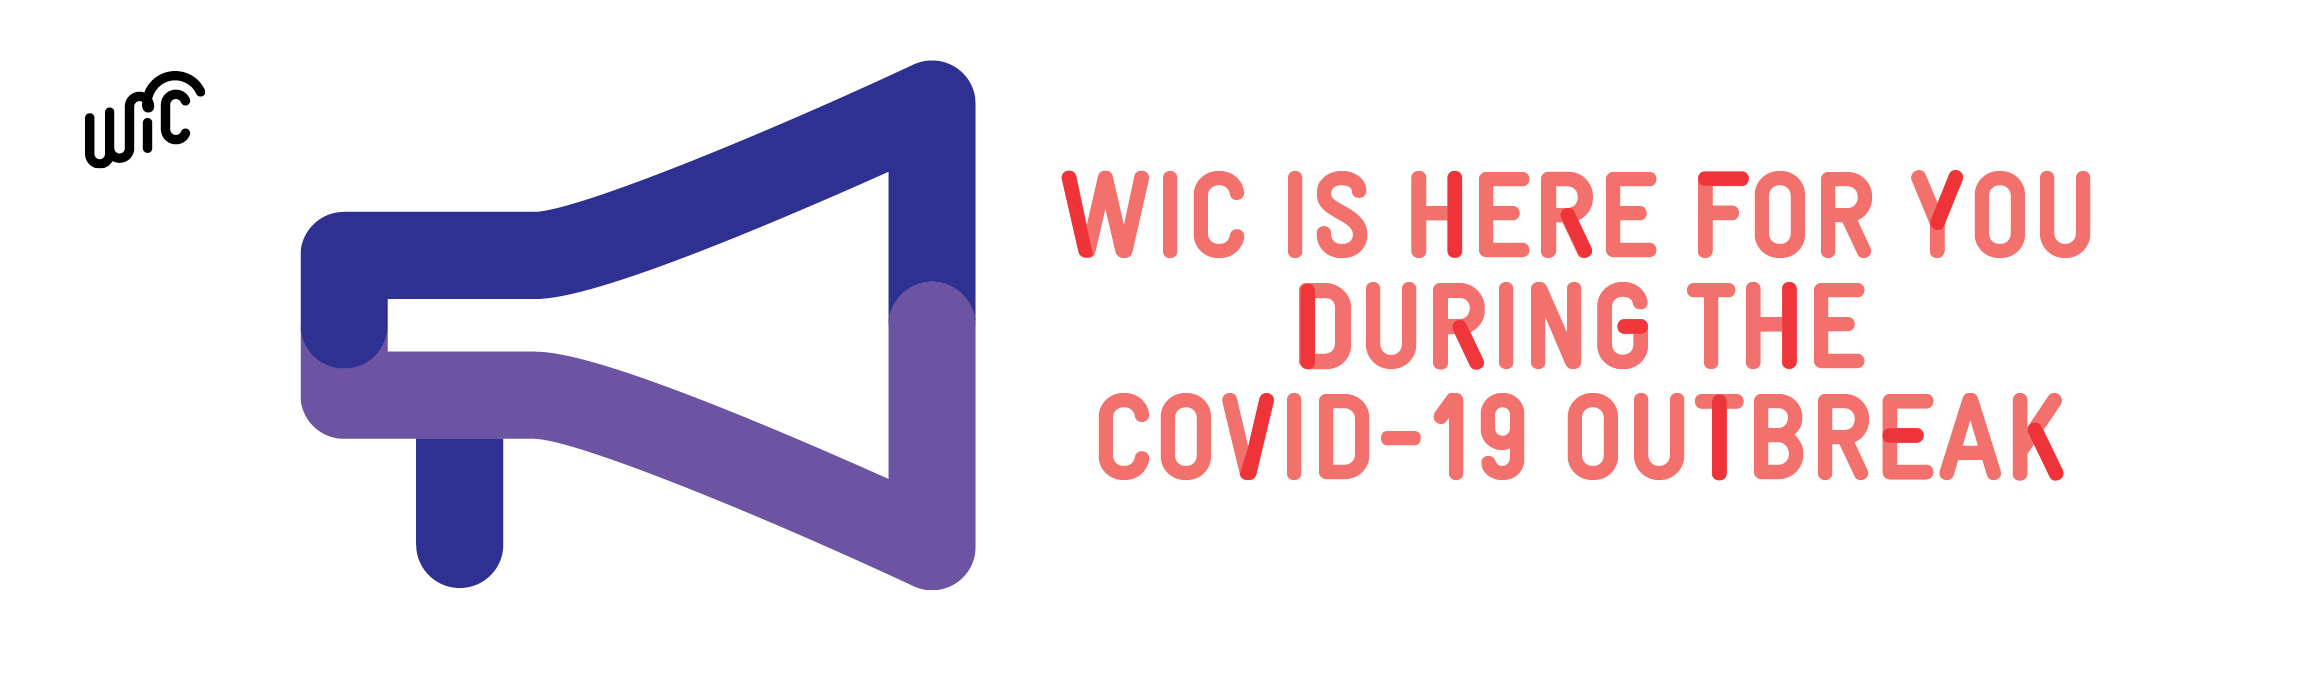 WIC is Here Image